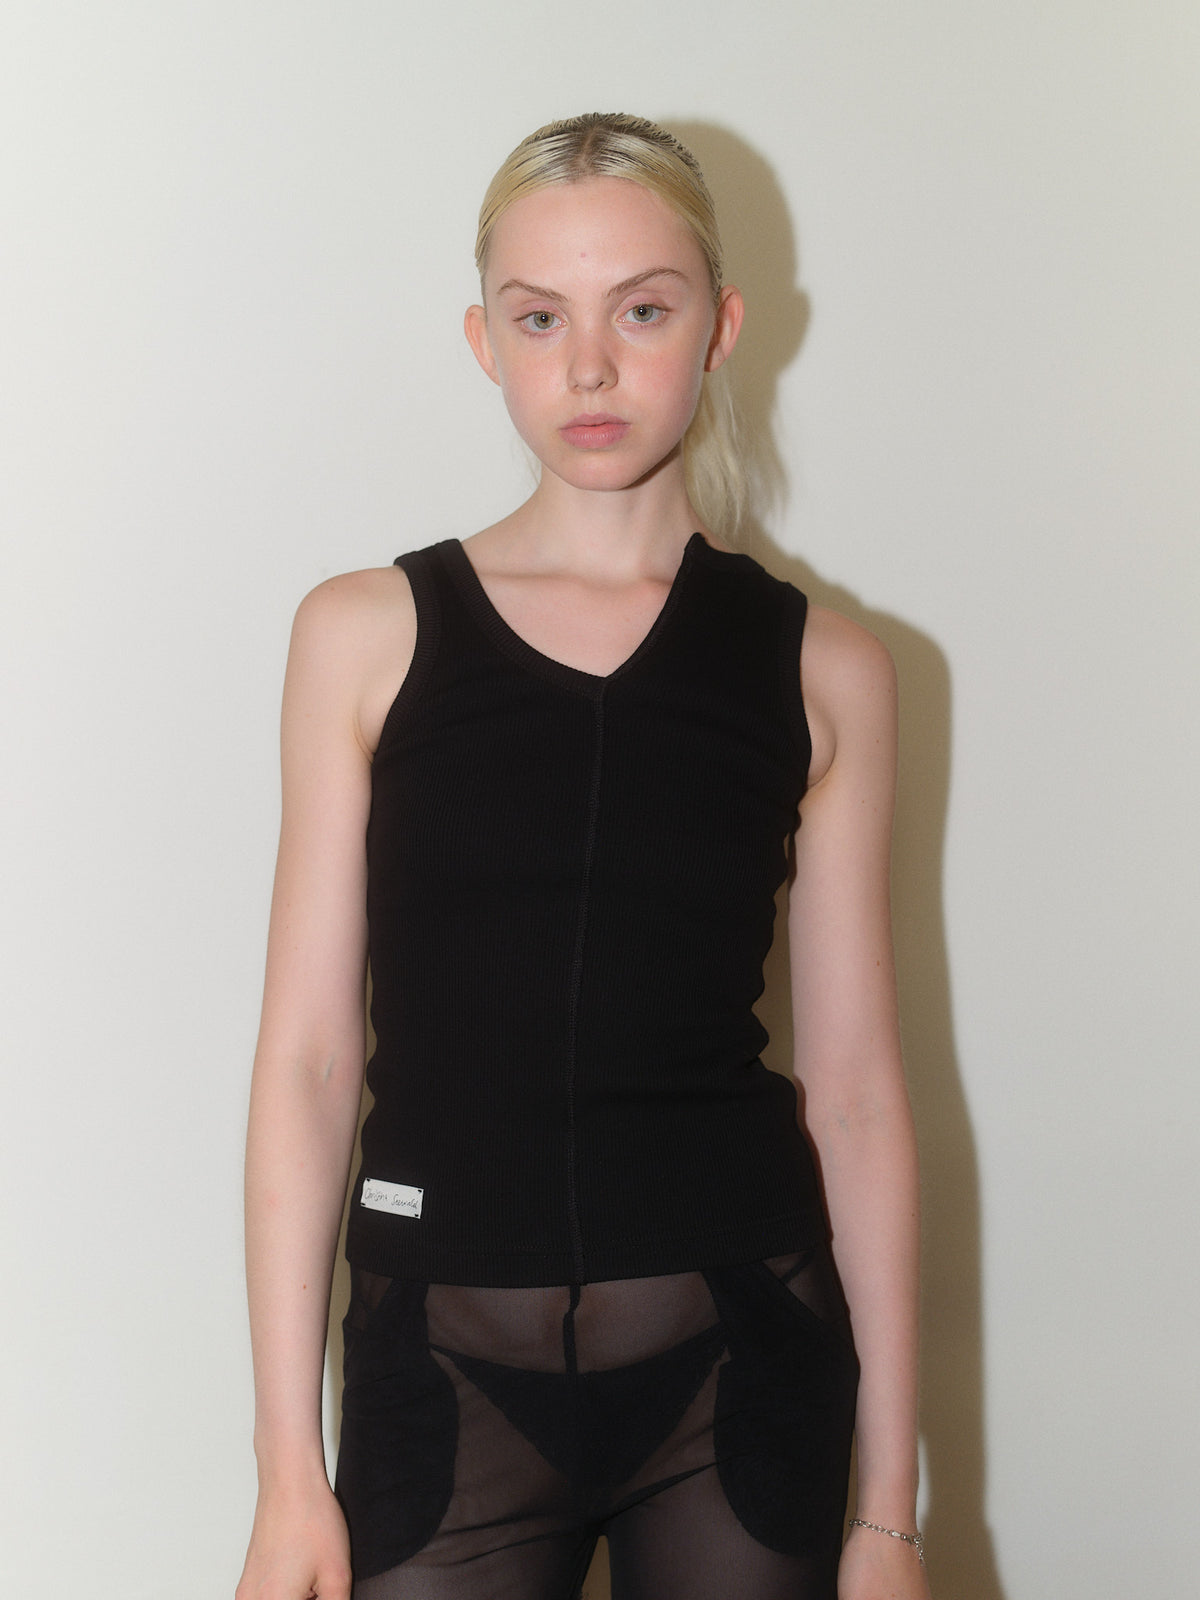 Tank Top designed by Christina Seewald. Sustainable, designed and made in Europe.